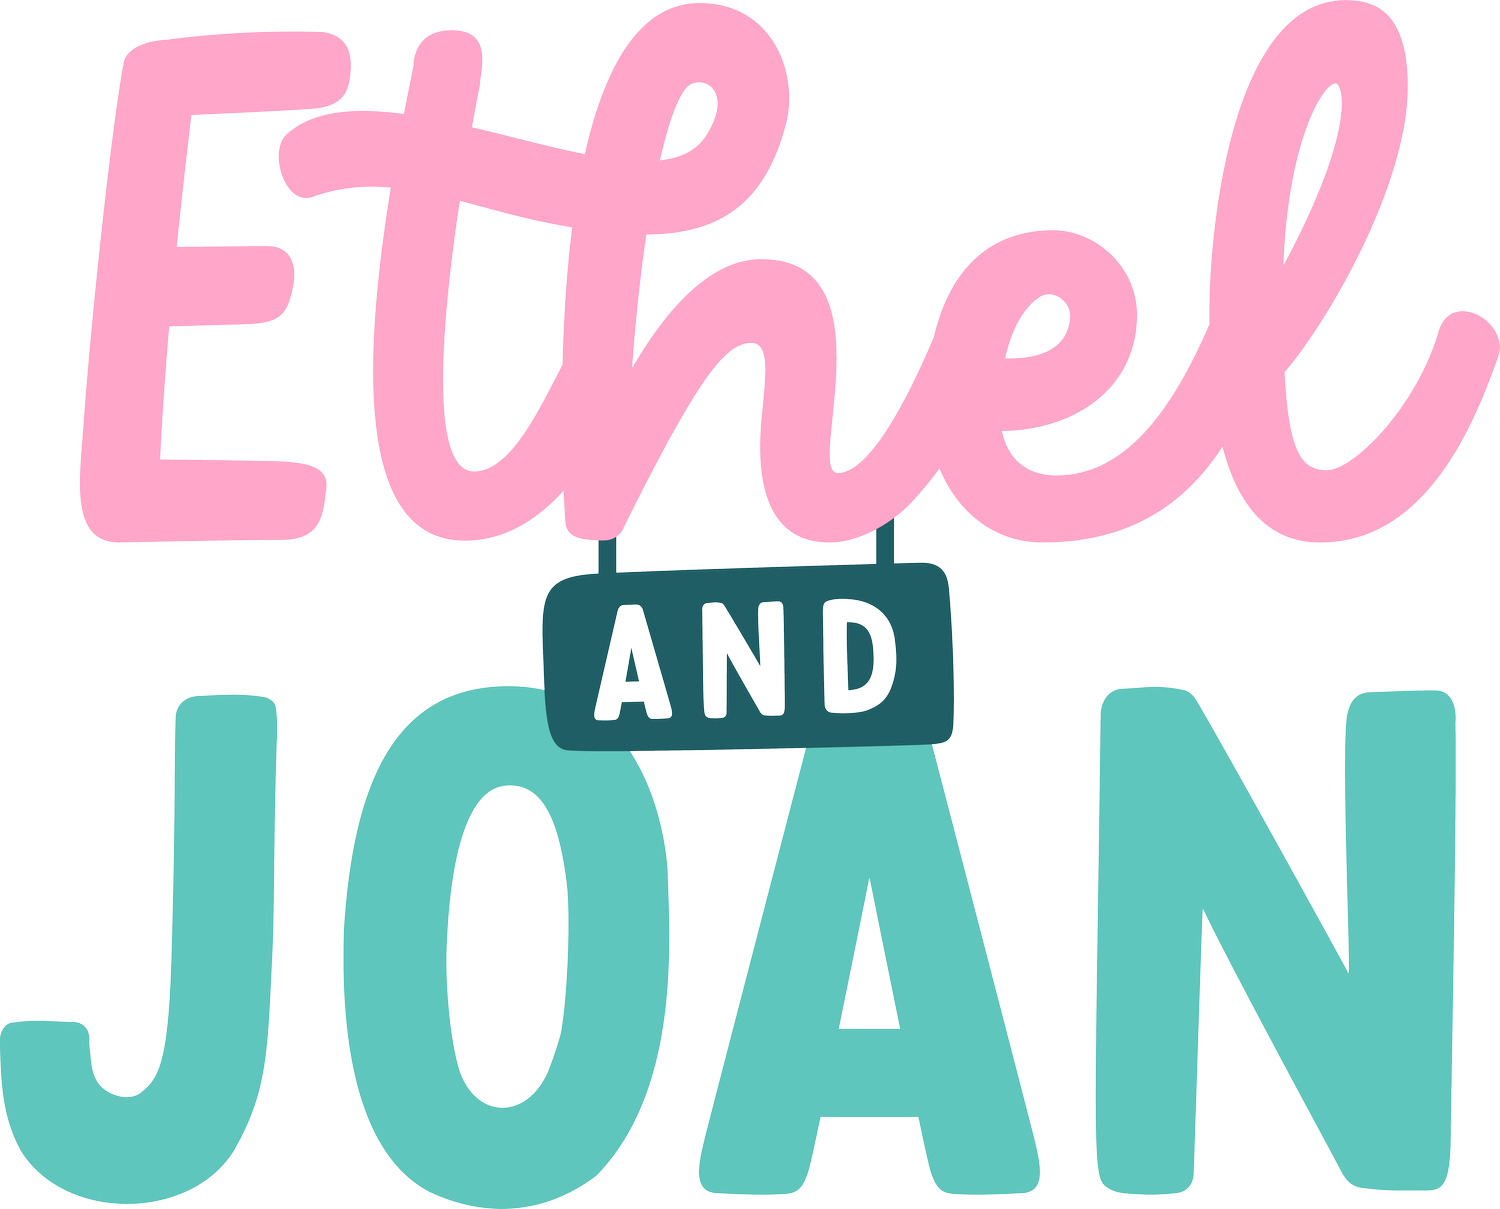 ethel and joan